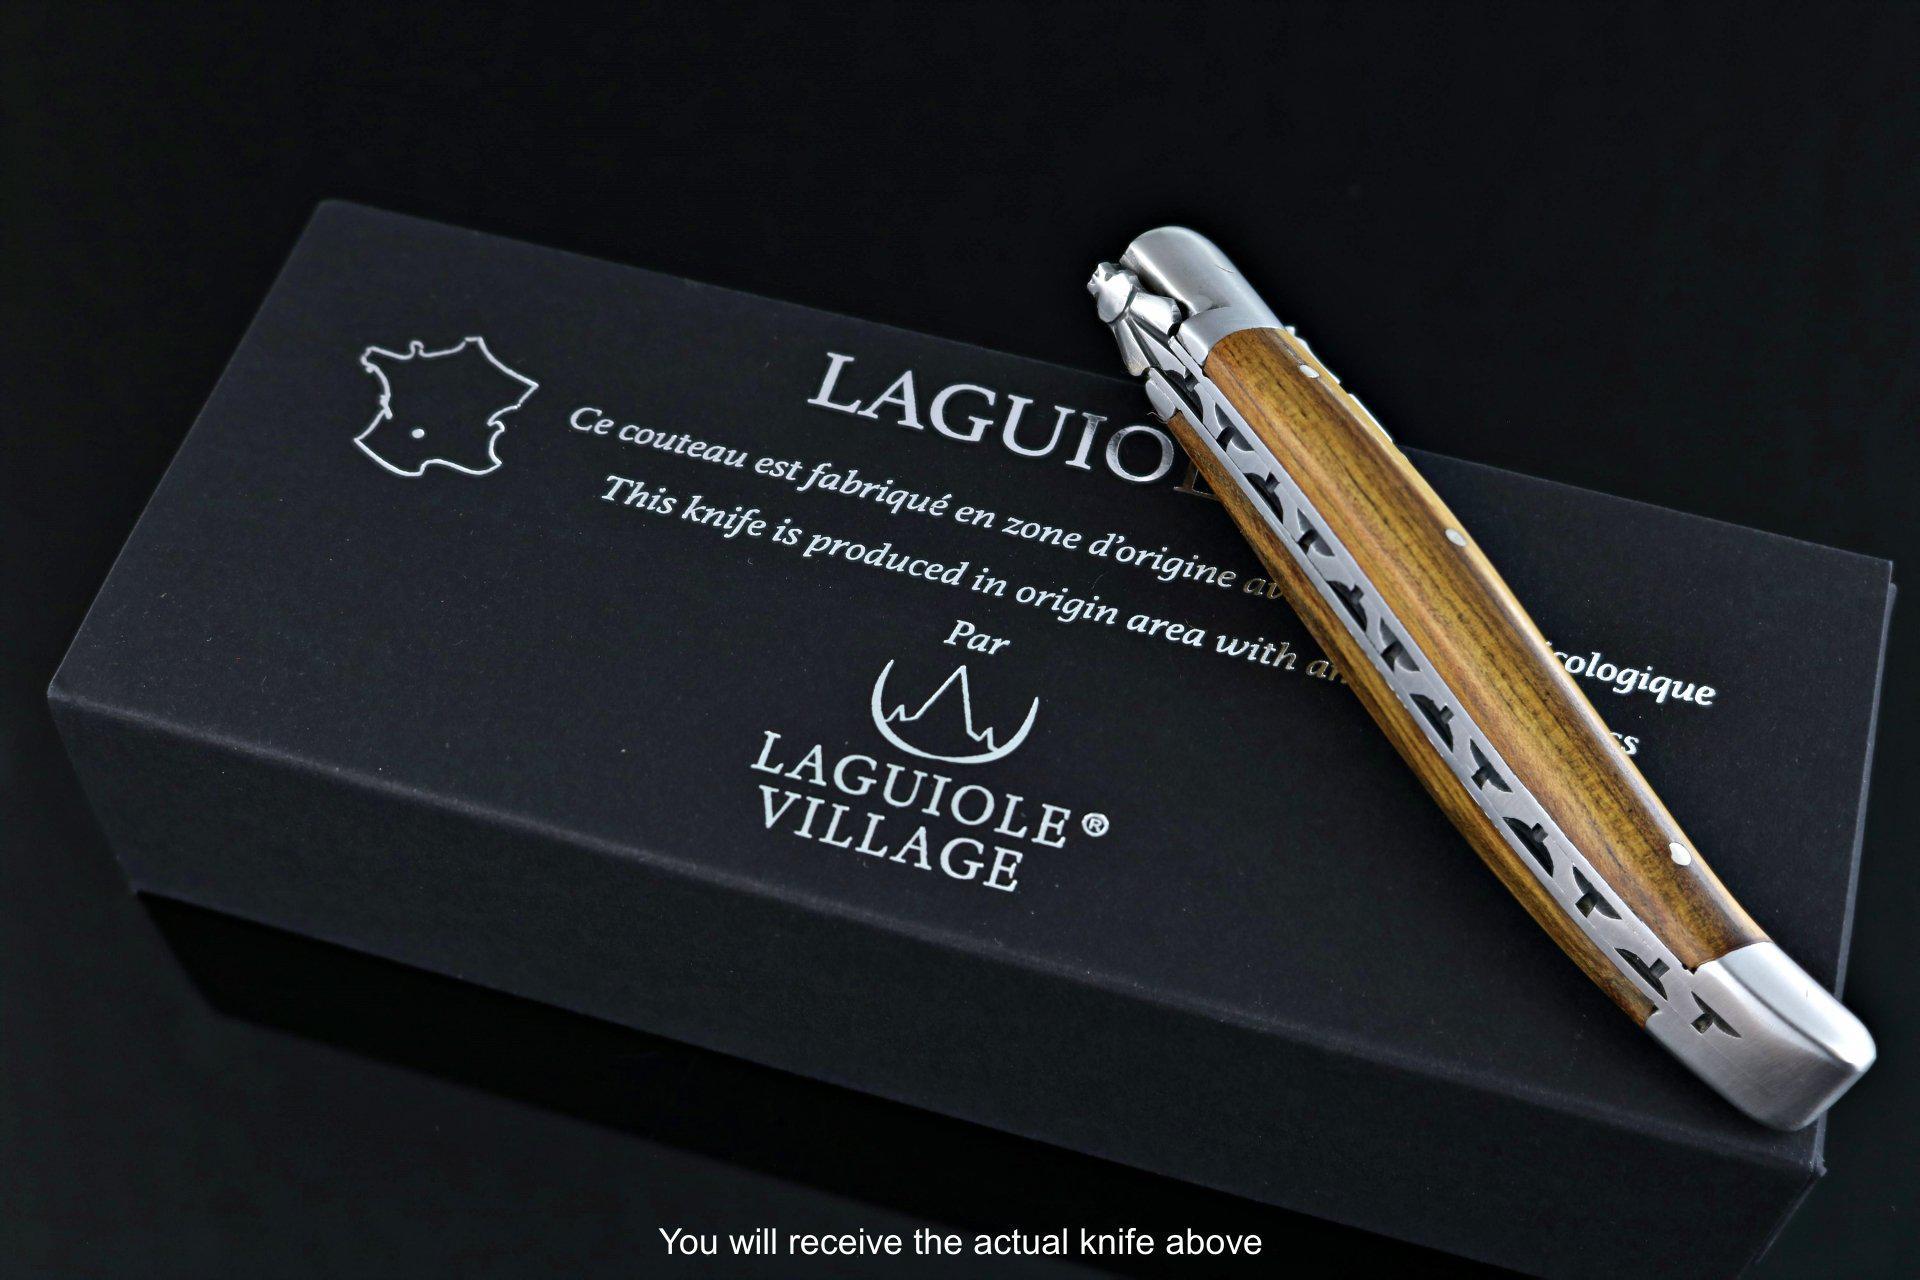 Laguiole Village 10 cm Forged Bee & Spring Pistachio Wood Handle #8-POCKET KNIFE